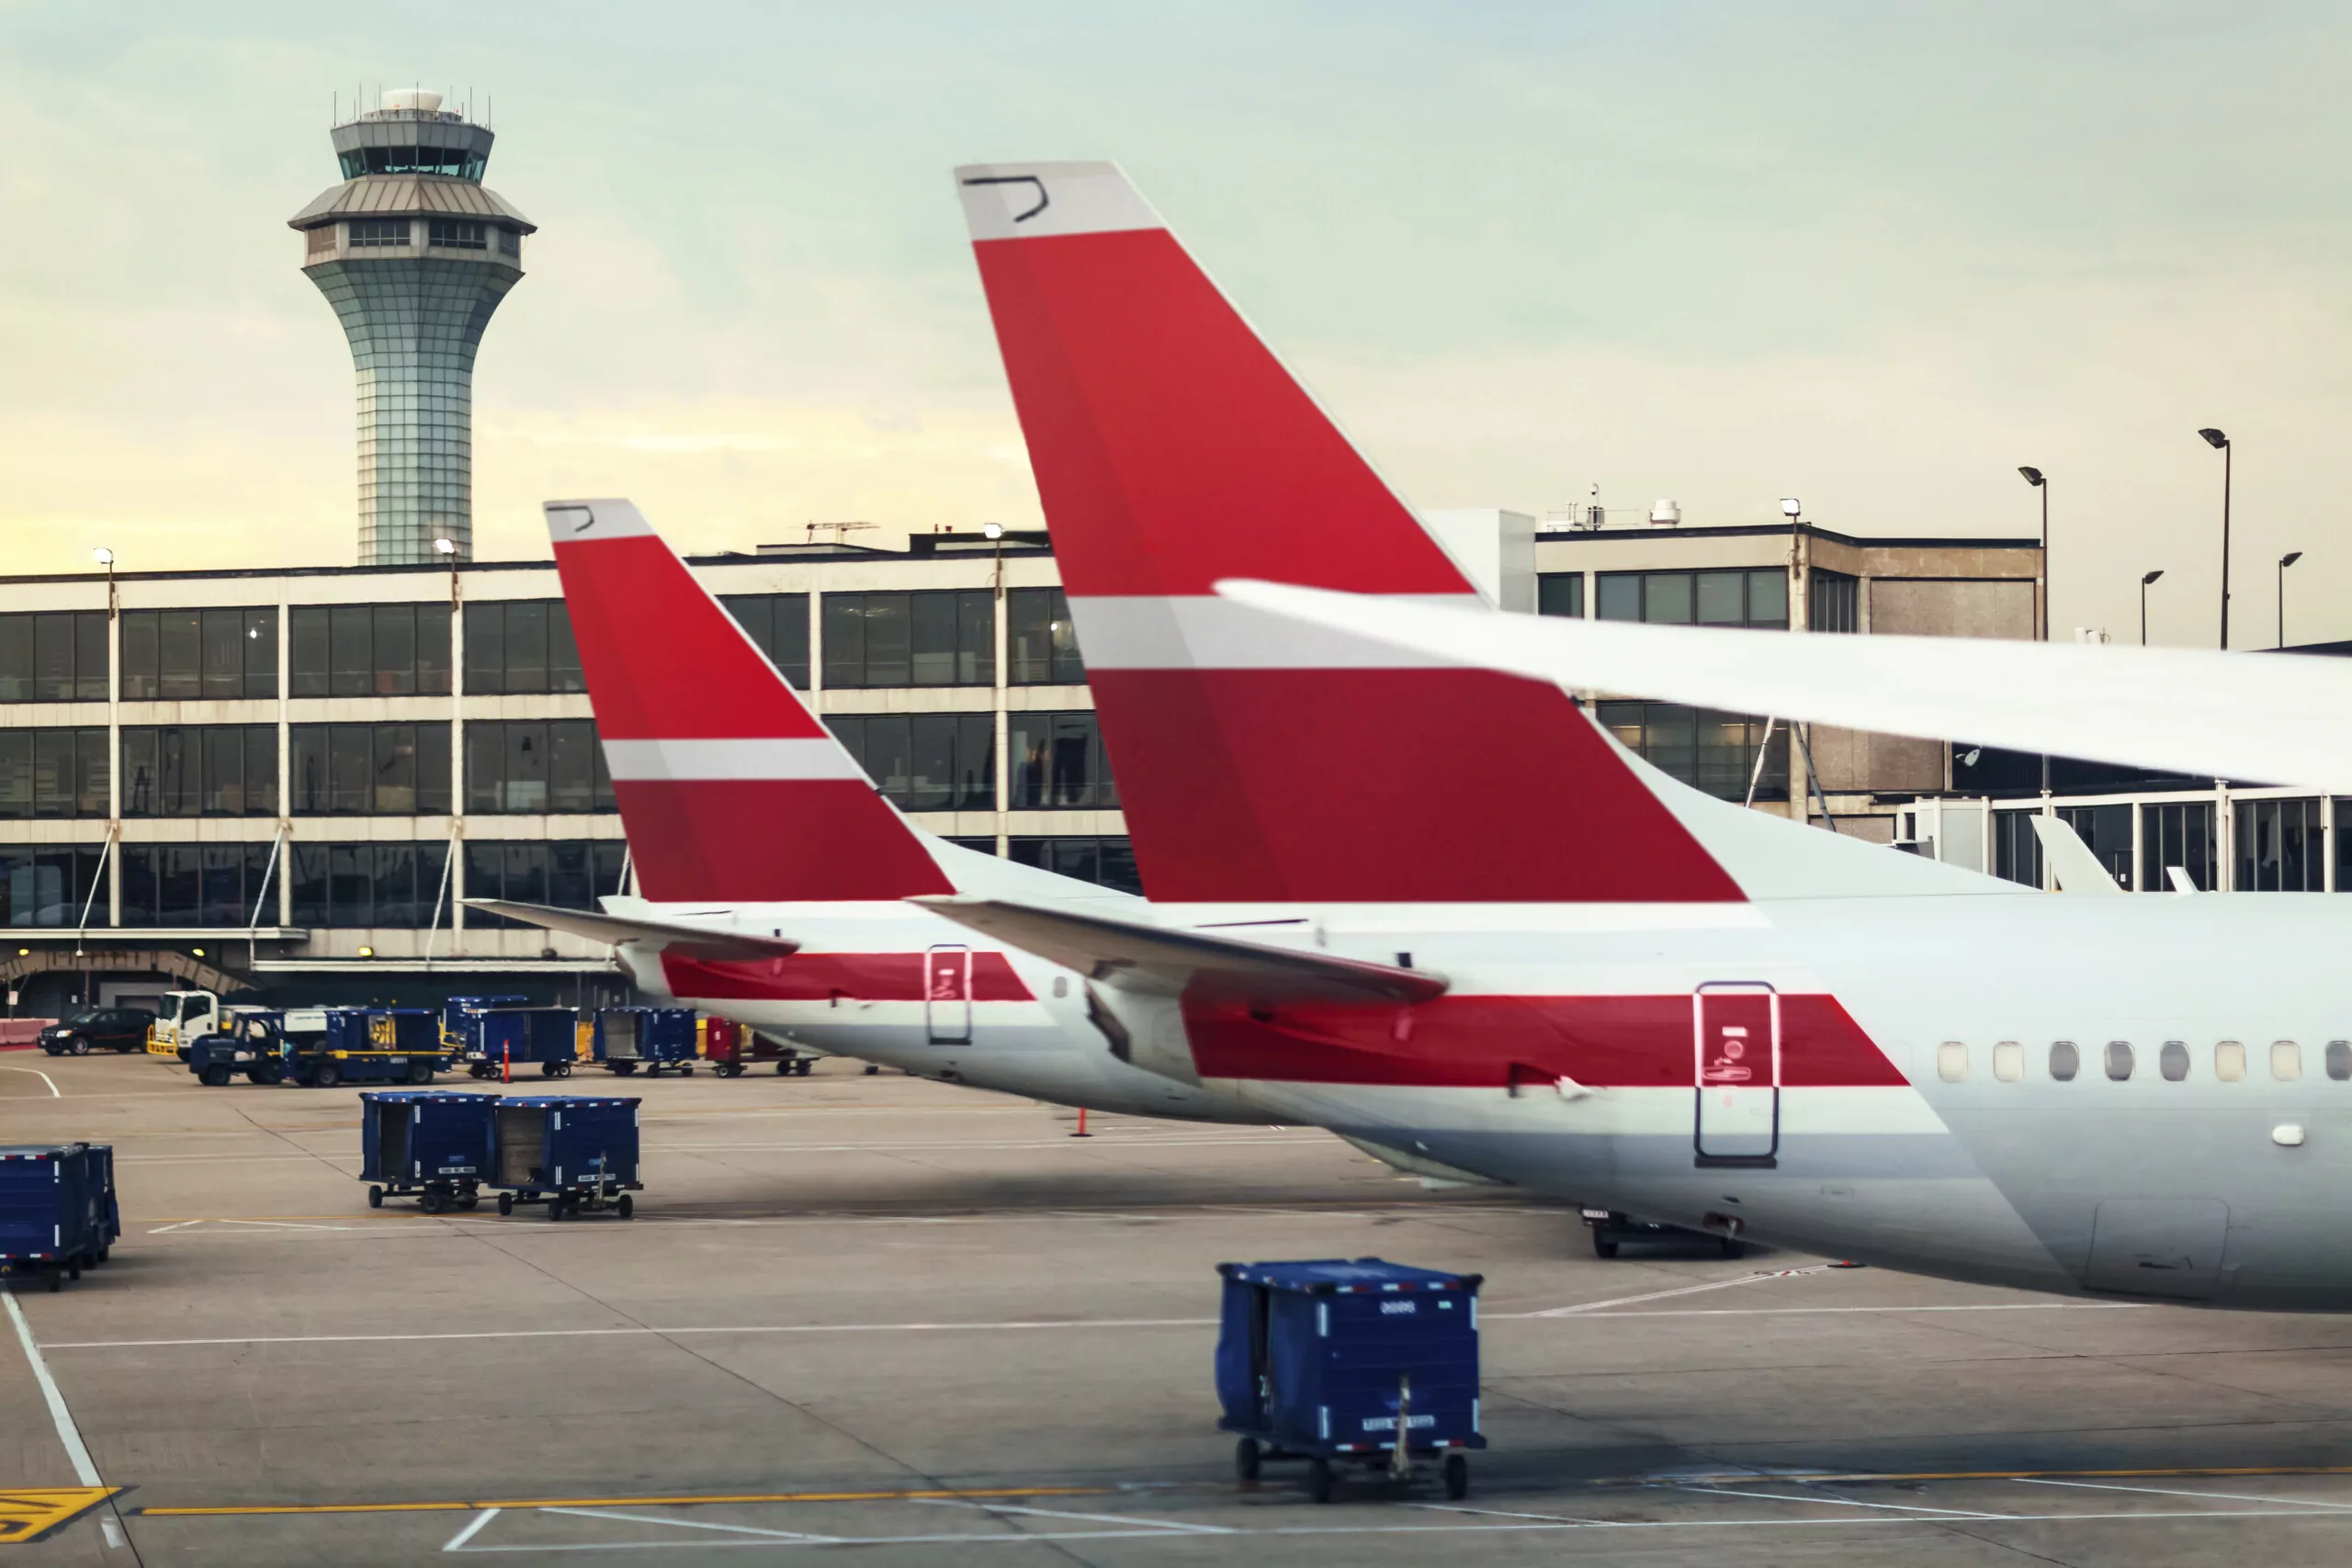 Two airplane tails on tarmac at airport